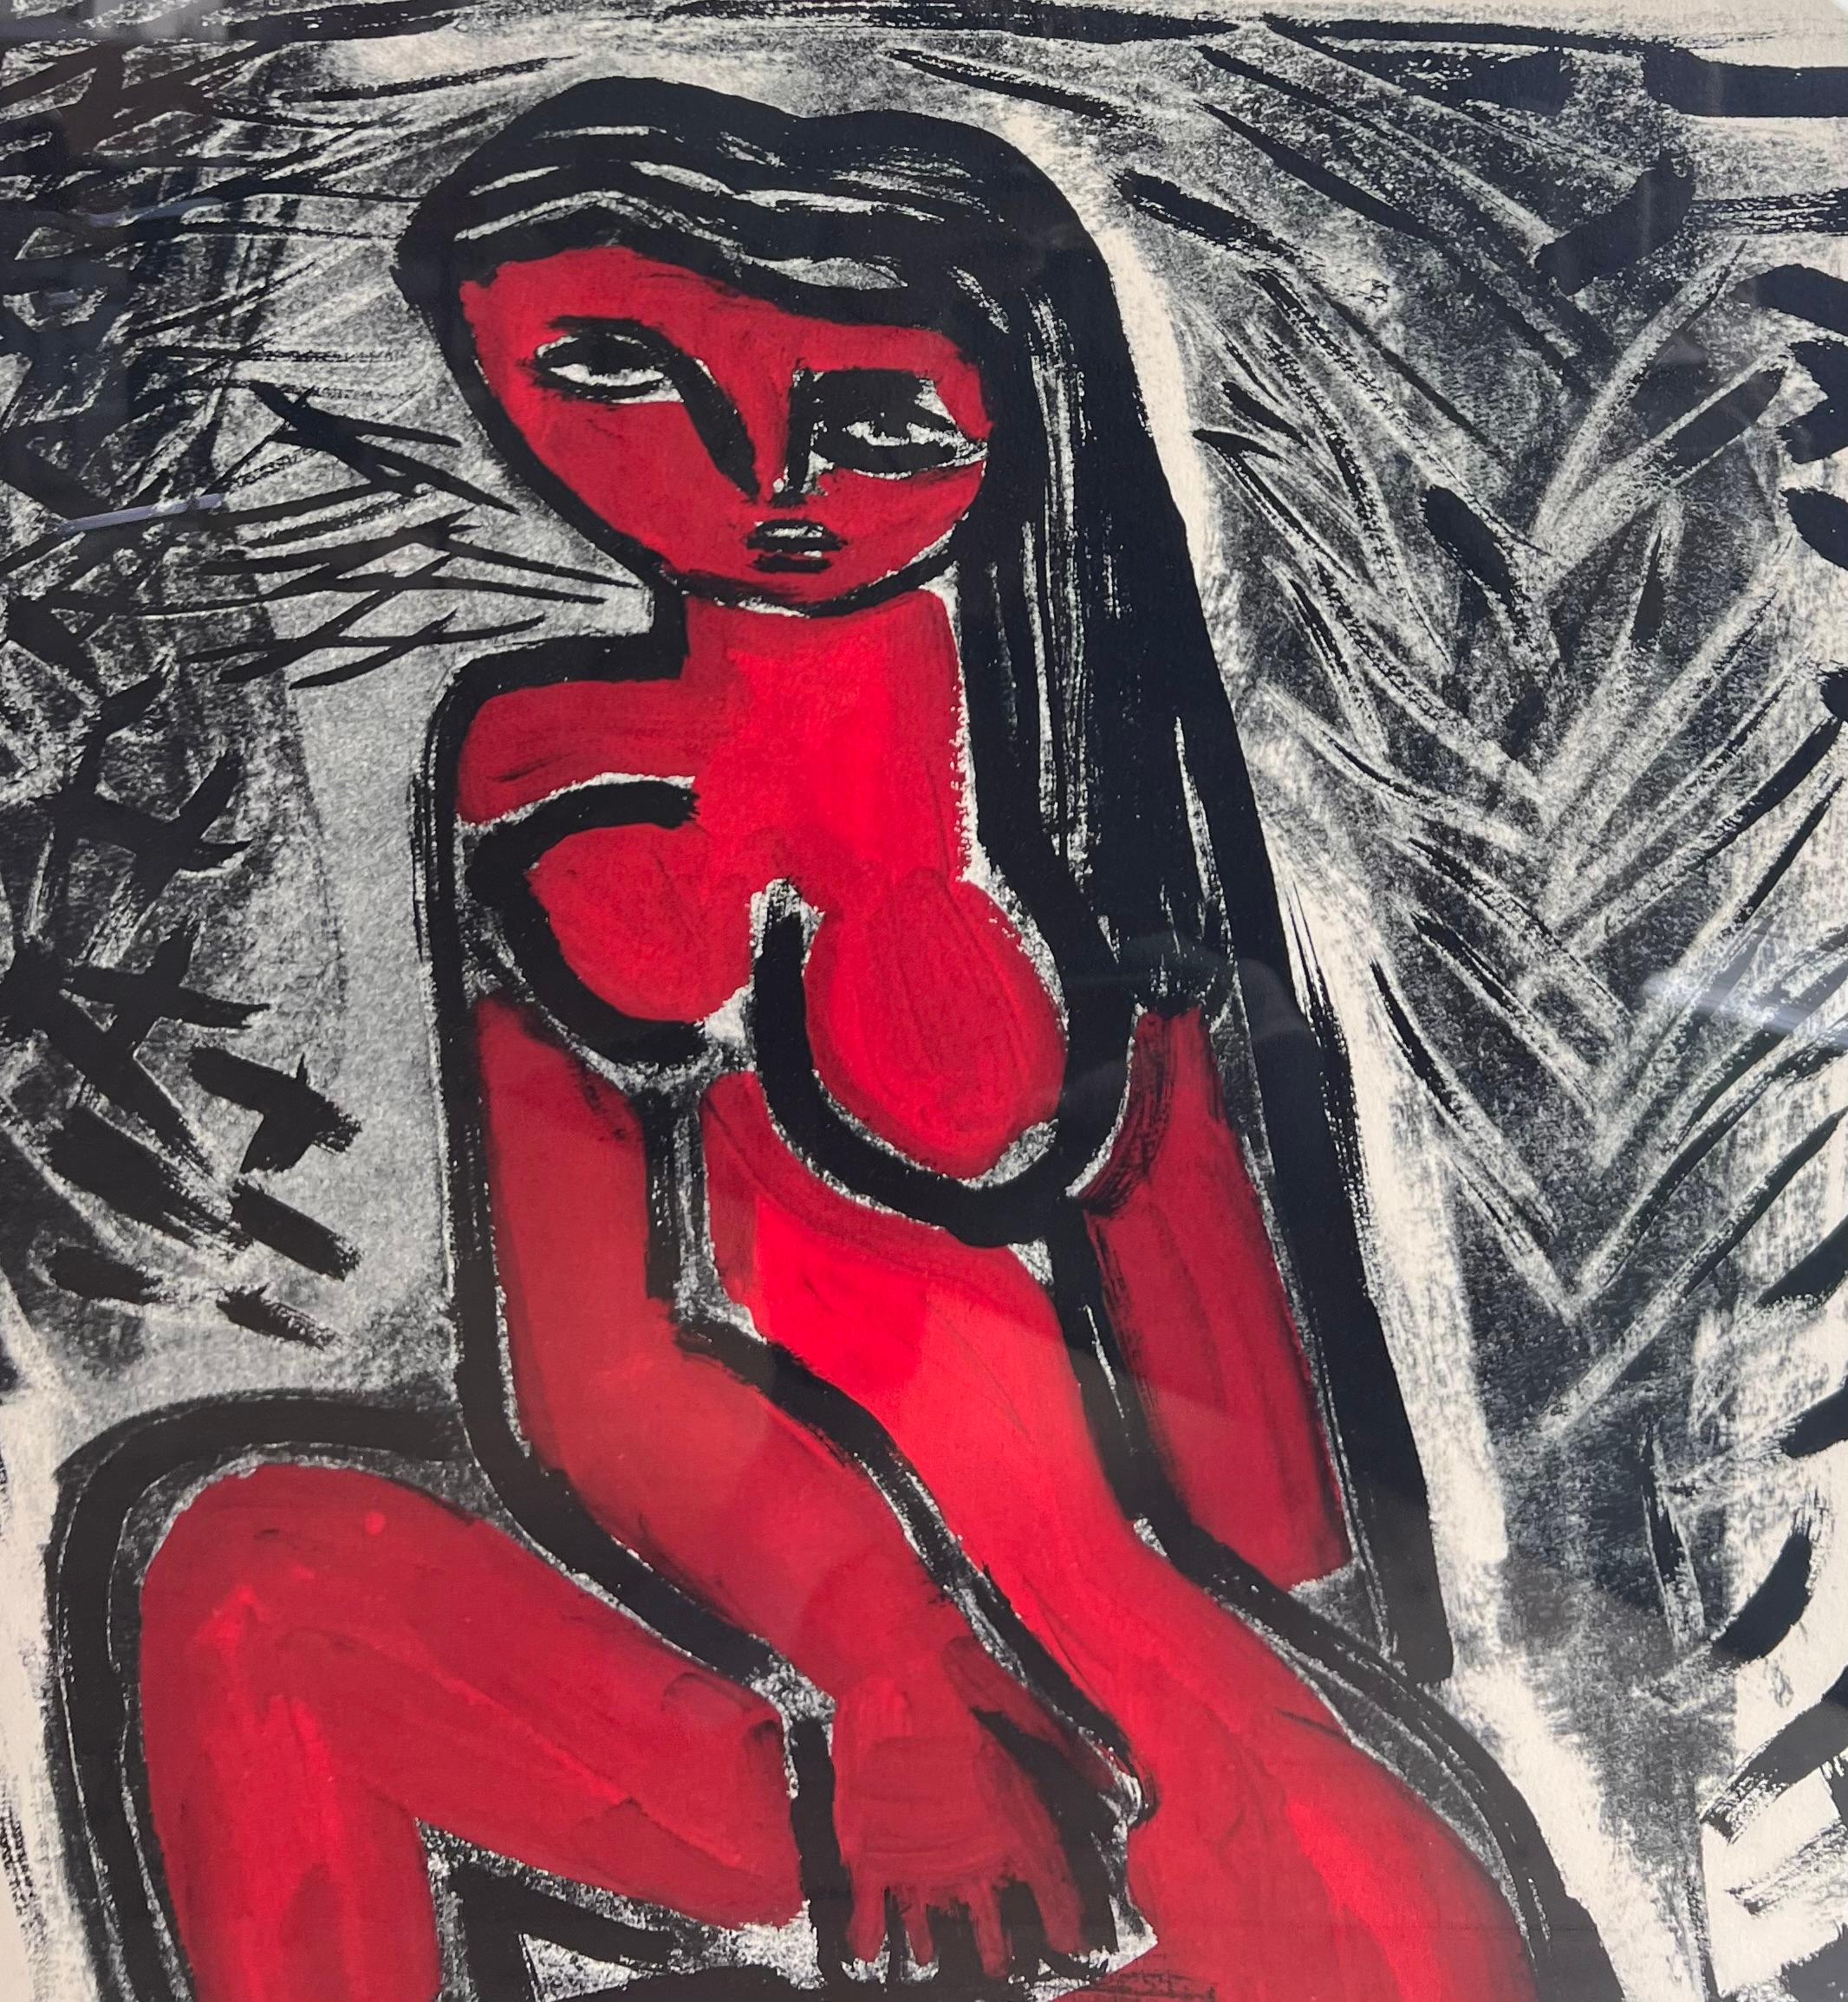 A modernist portrait of a femme in red by Guillaume Corneille (1922-2010), signed, Netherlands 20th century. Edition 36 of 125. This is an early monochromatic work of Corneille, who was known primarily for his later colorful pieces with fauvist